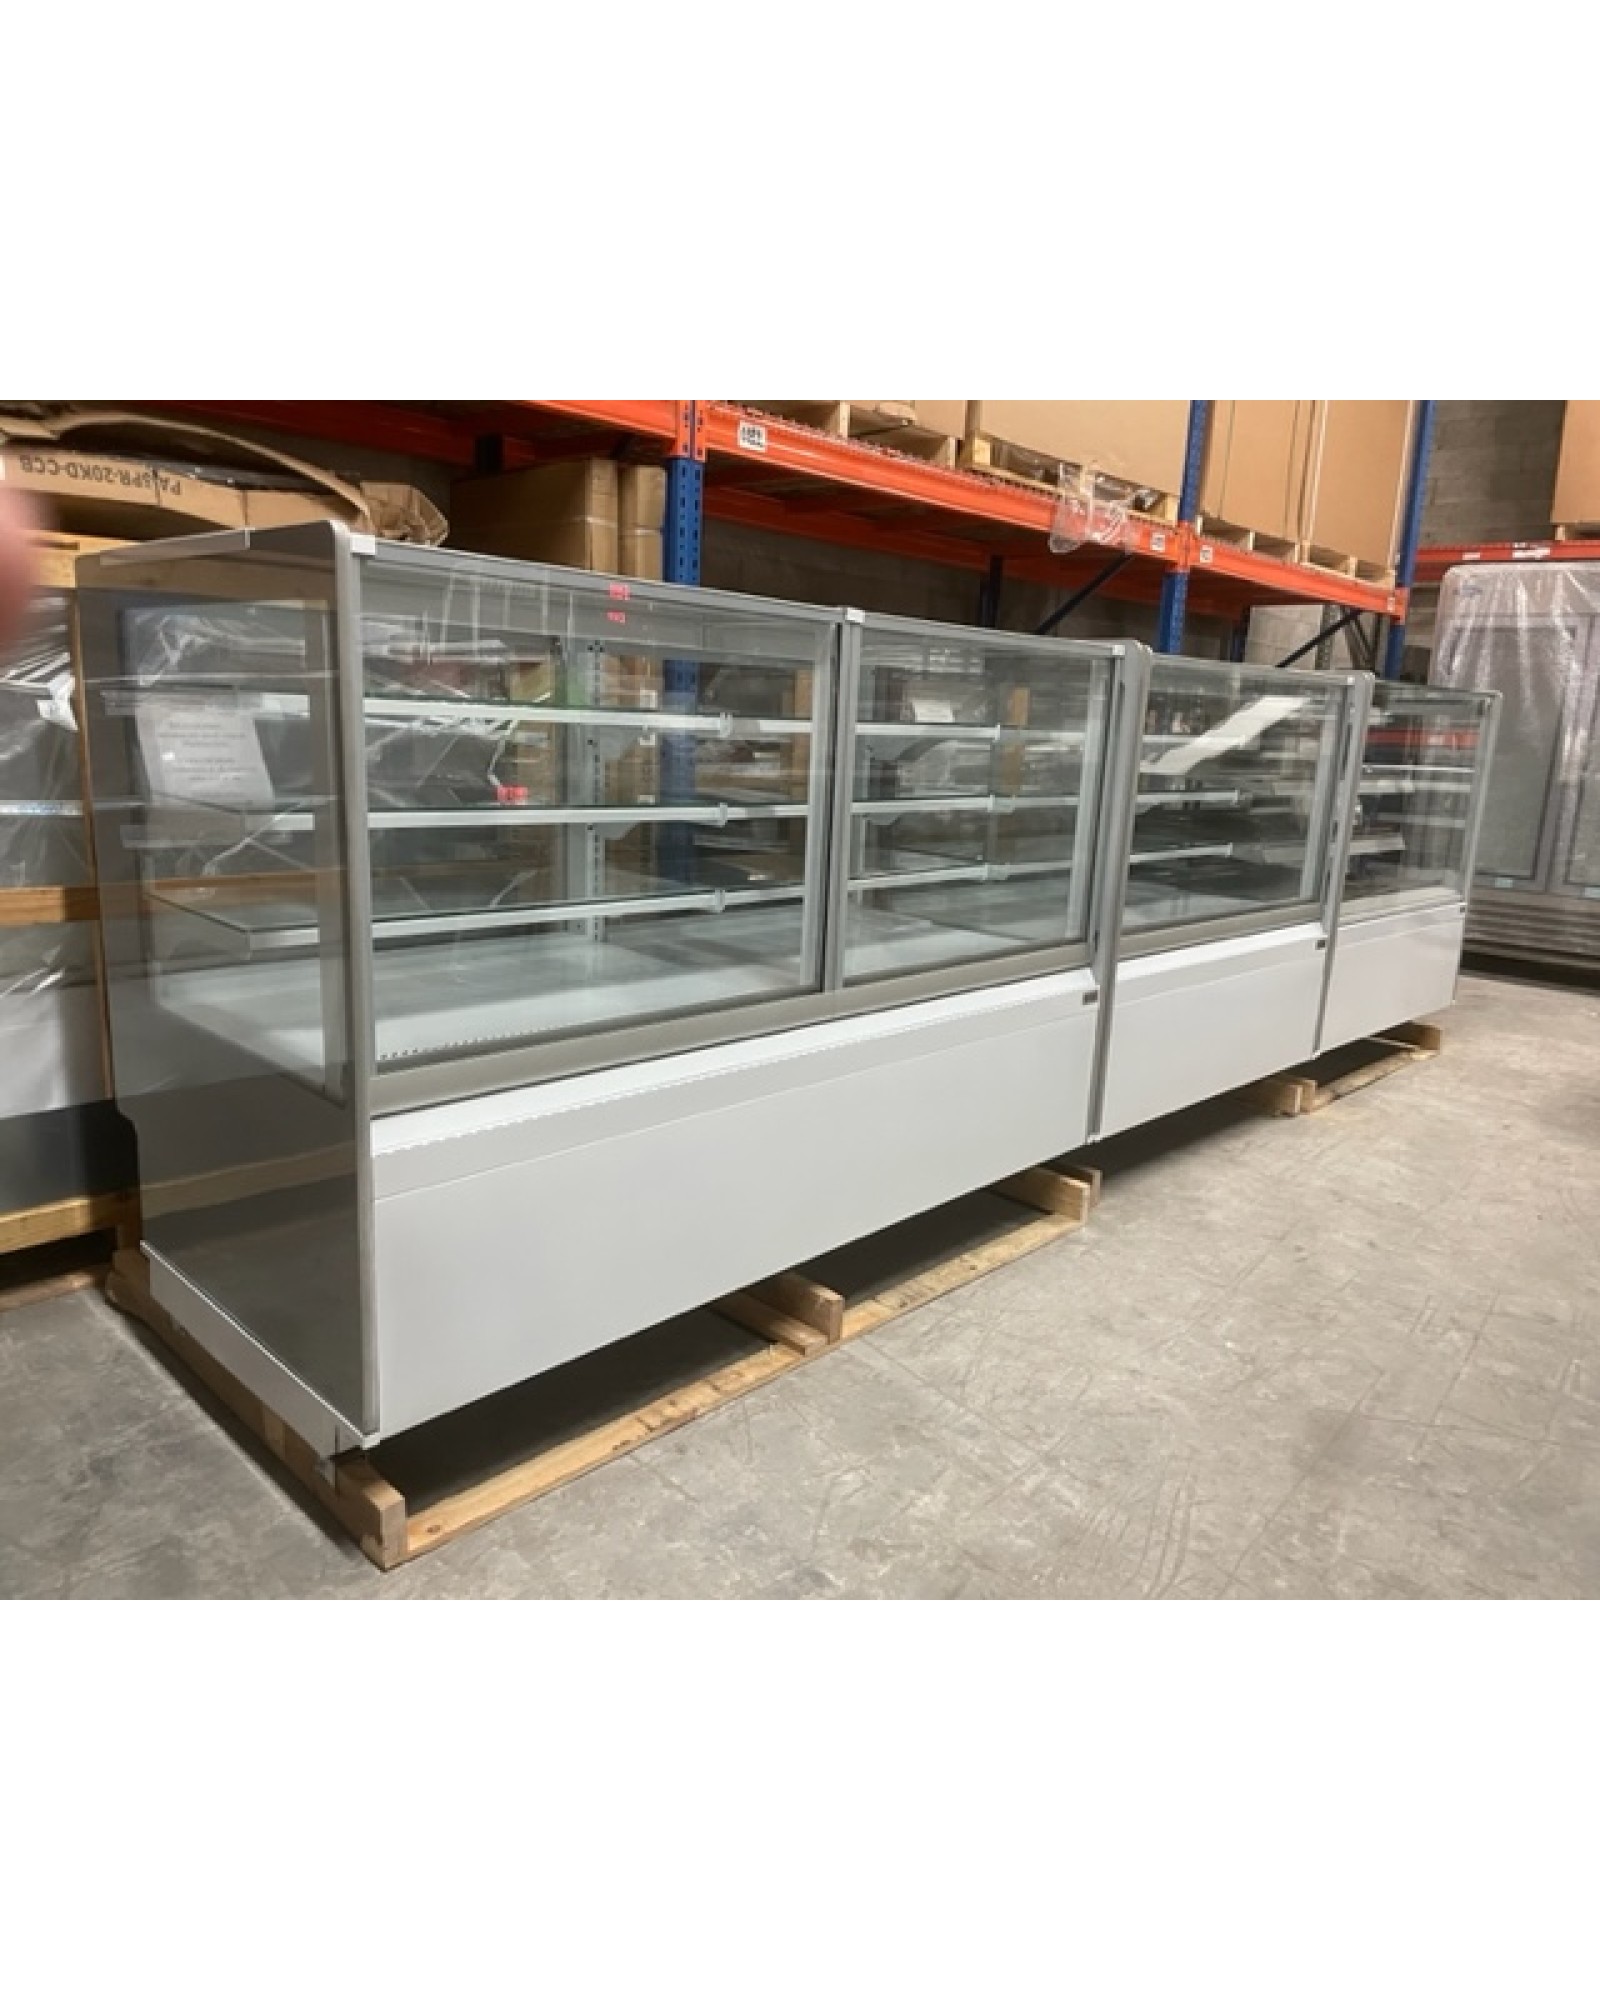 Bakery Case (Refrigerated 39")